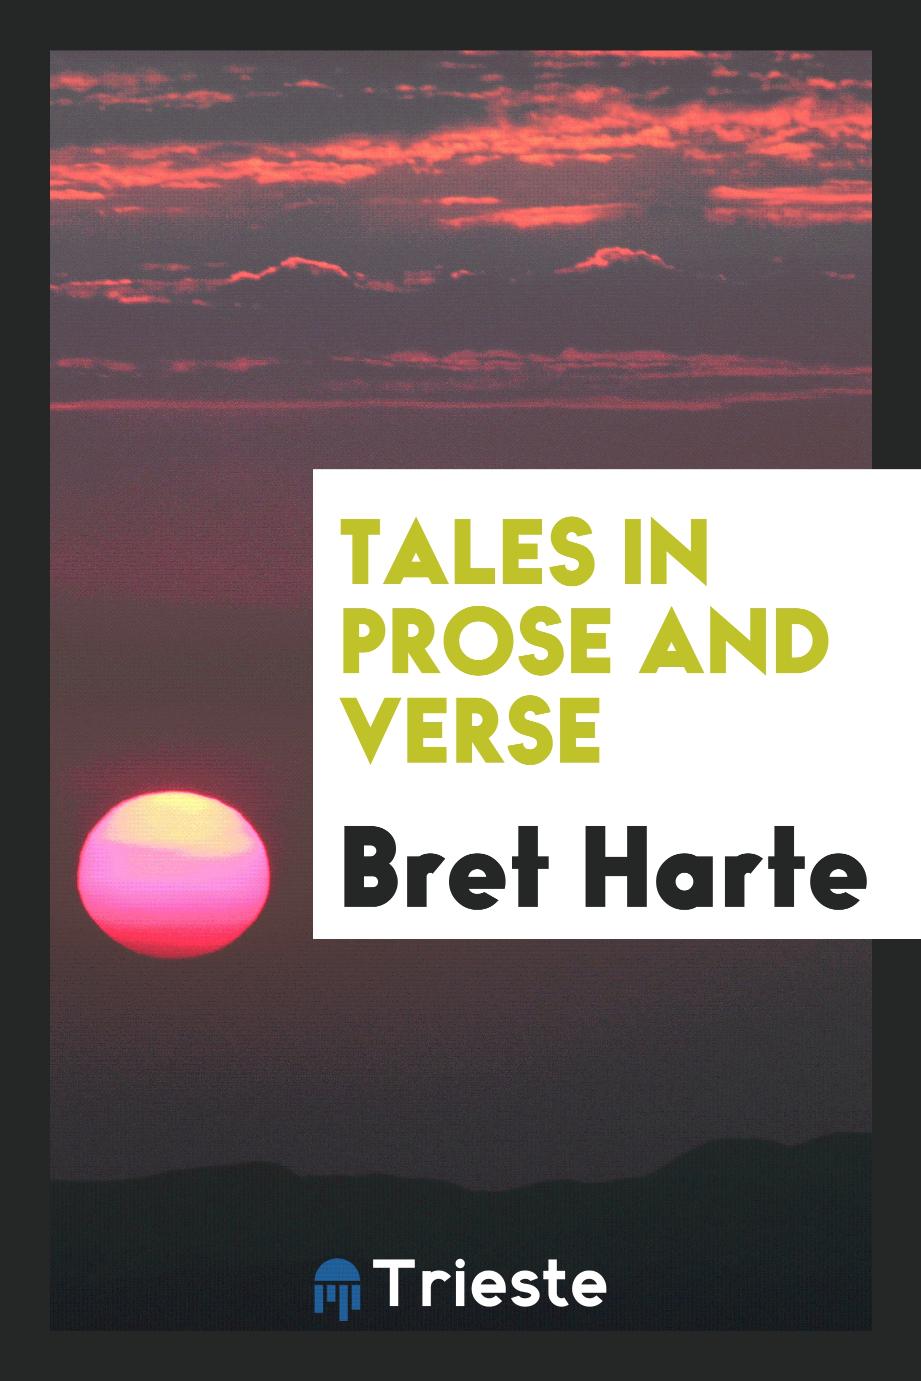 Tales in prose and verse